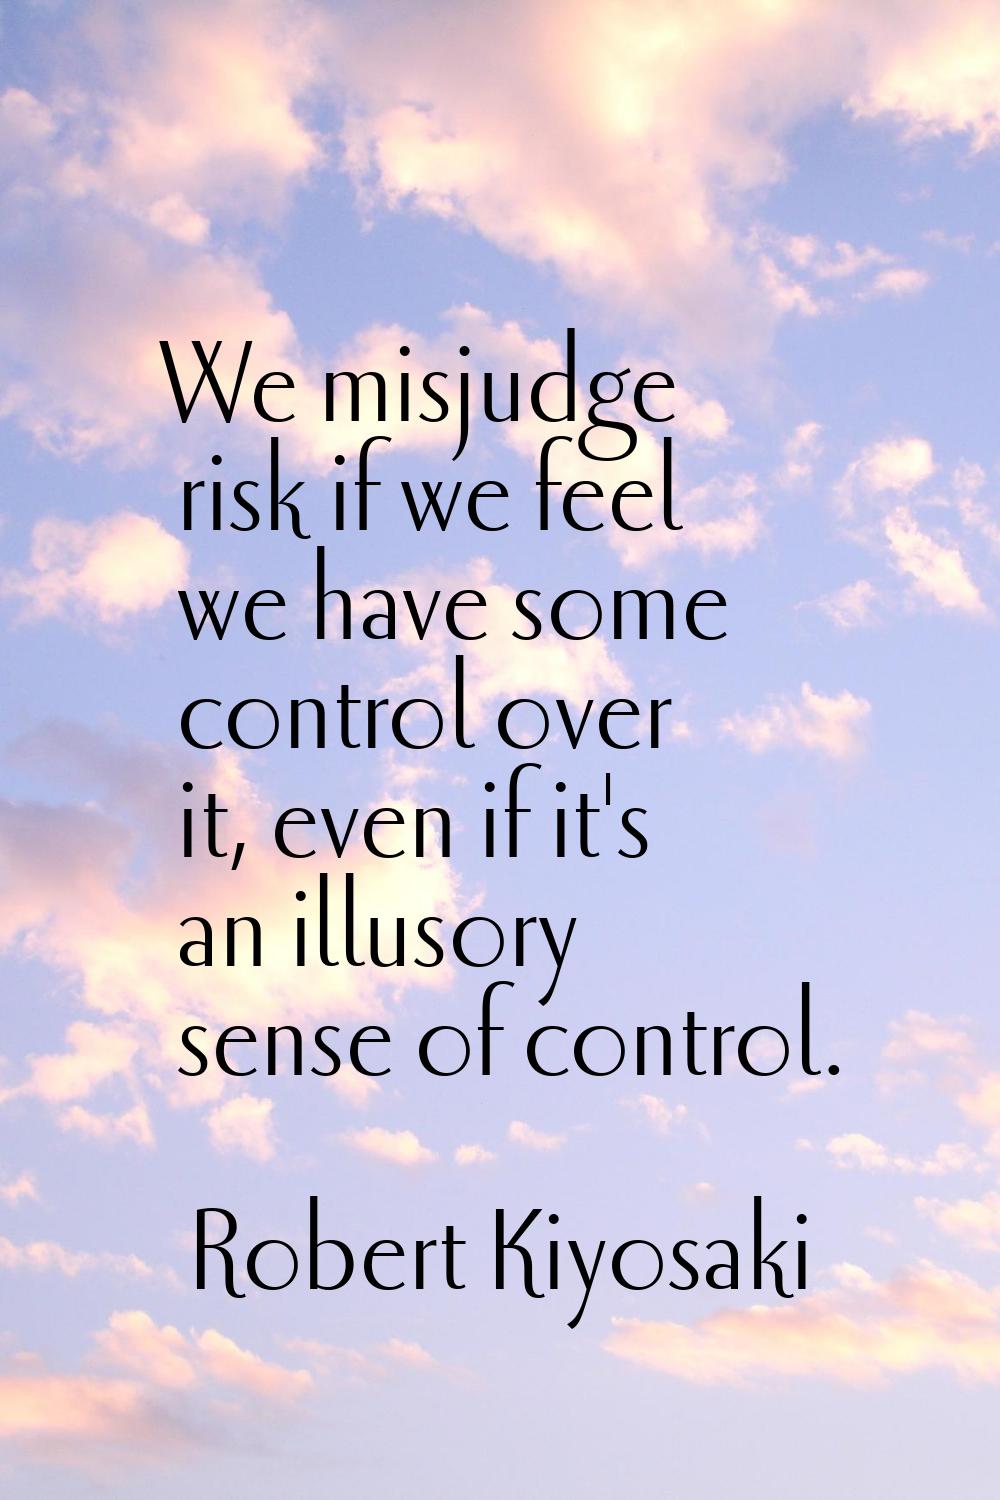 We misjudge risk if we feel we have some control over it, even if it's an illusory sense of control